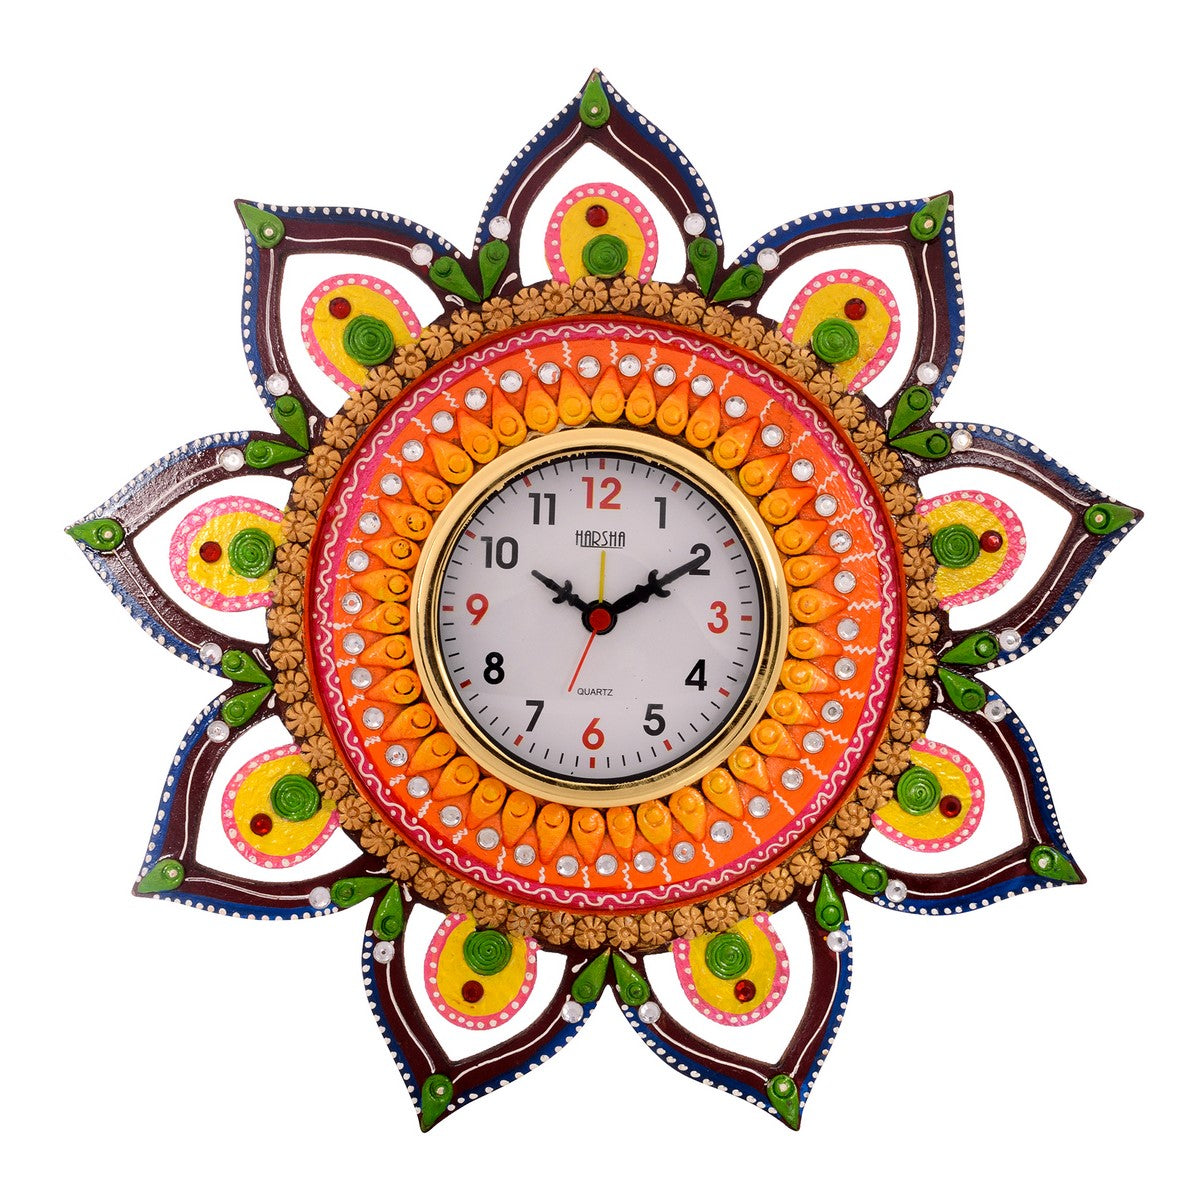 Decorative and Glossy Papier-Mache Wooden Handcrafted Wall Clock